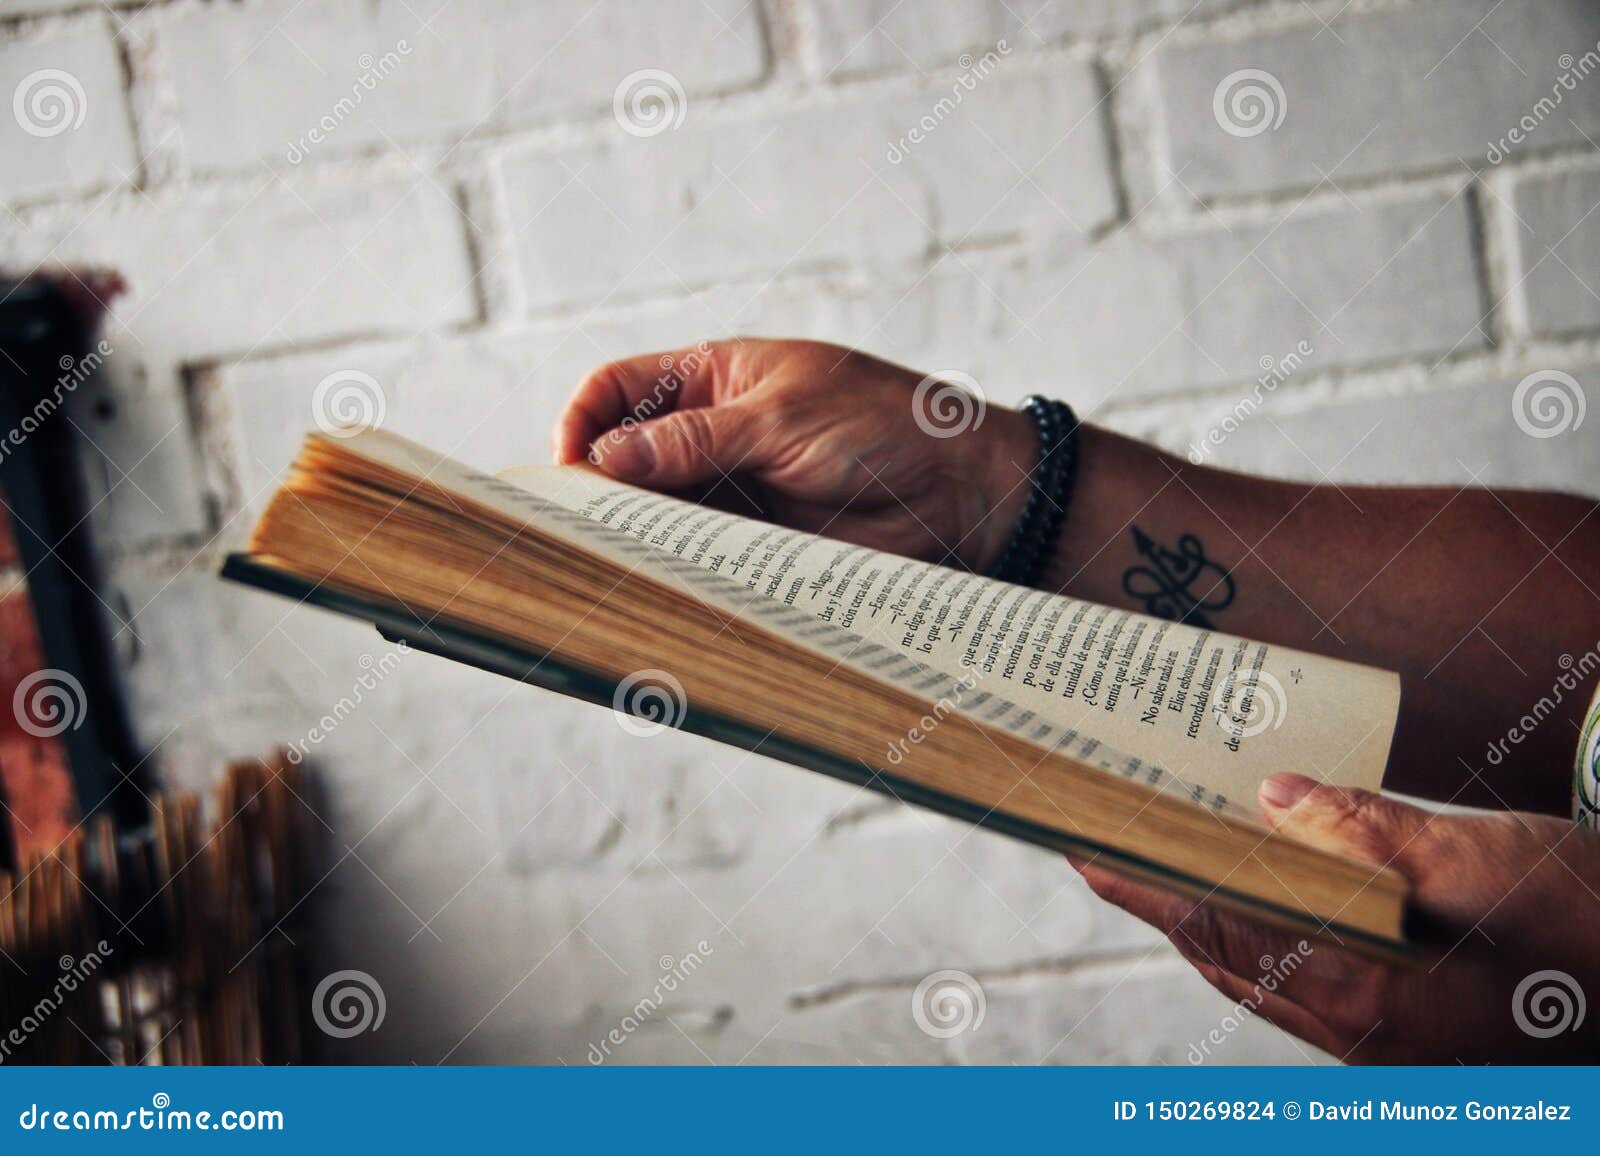 person with tattoo reading a book.